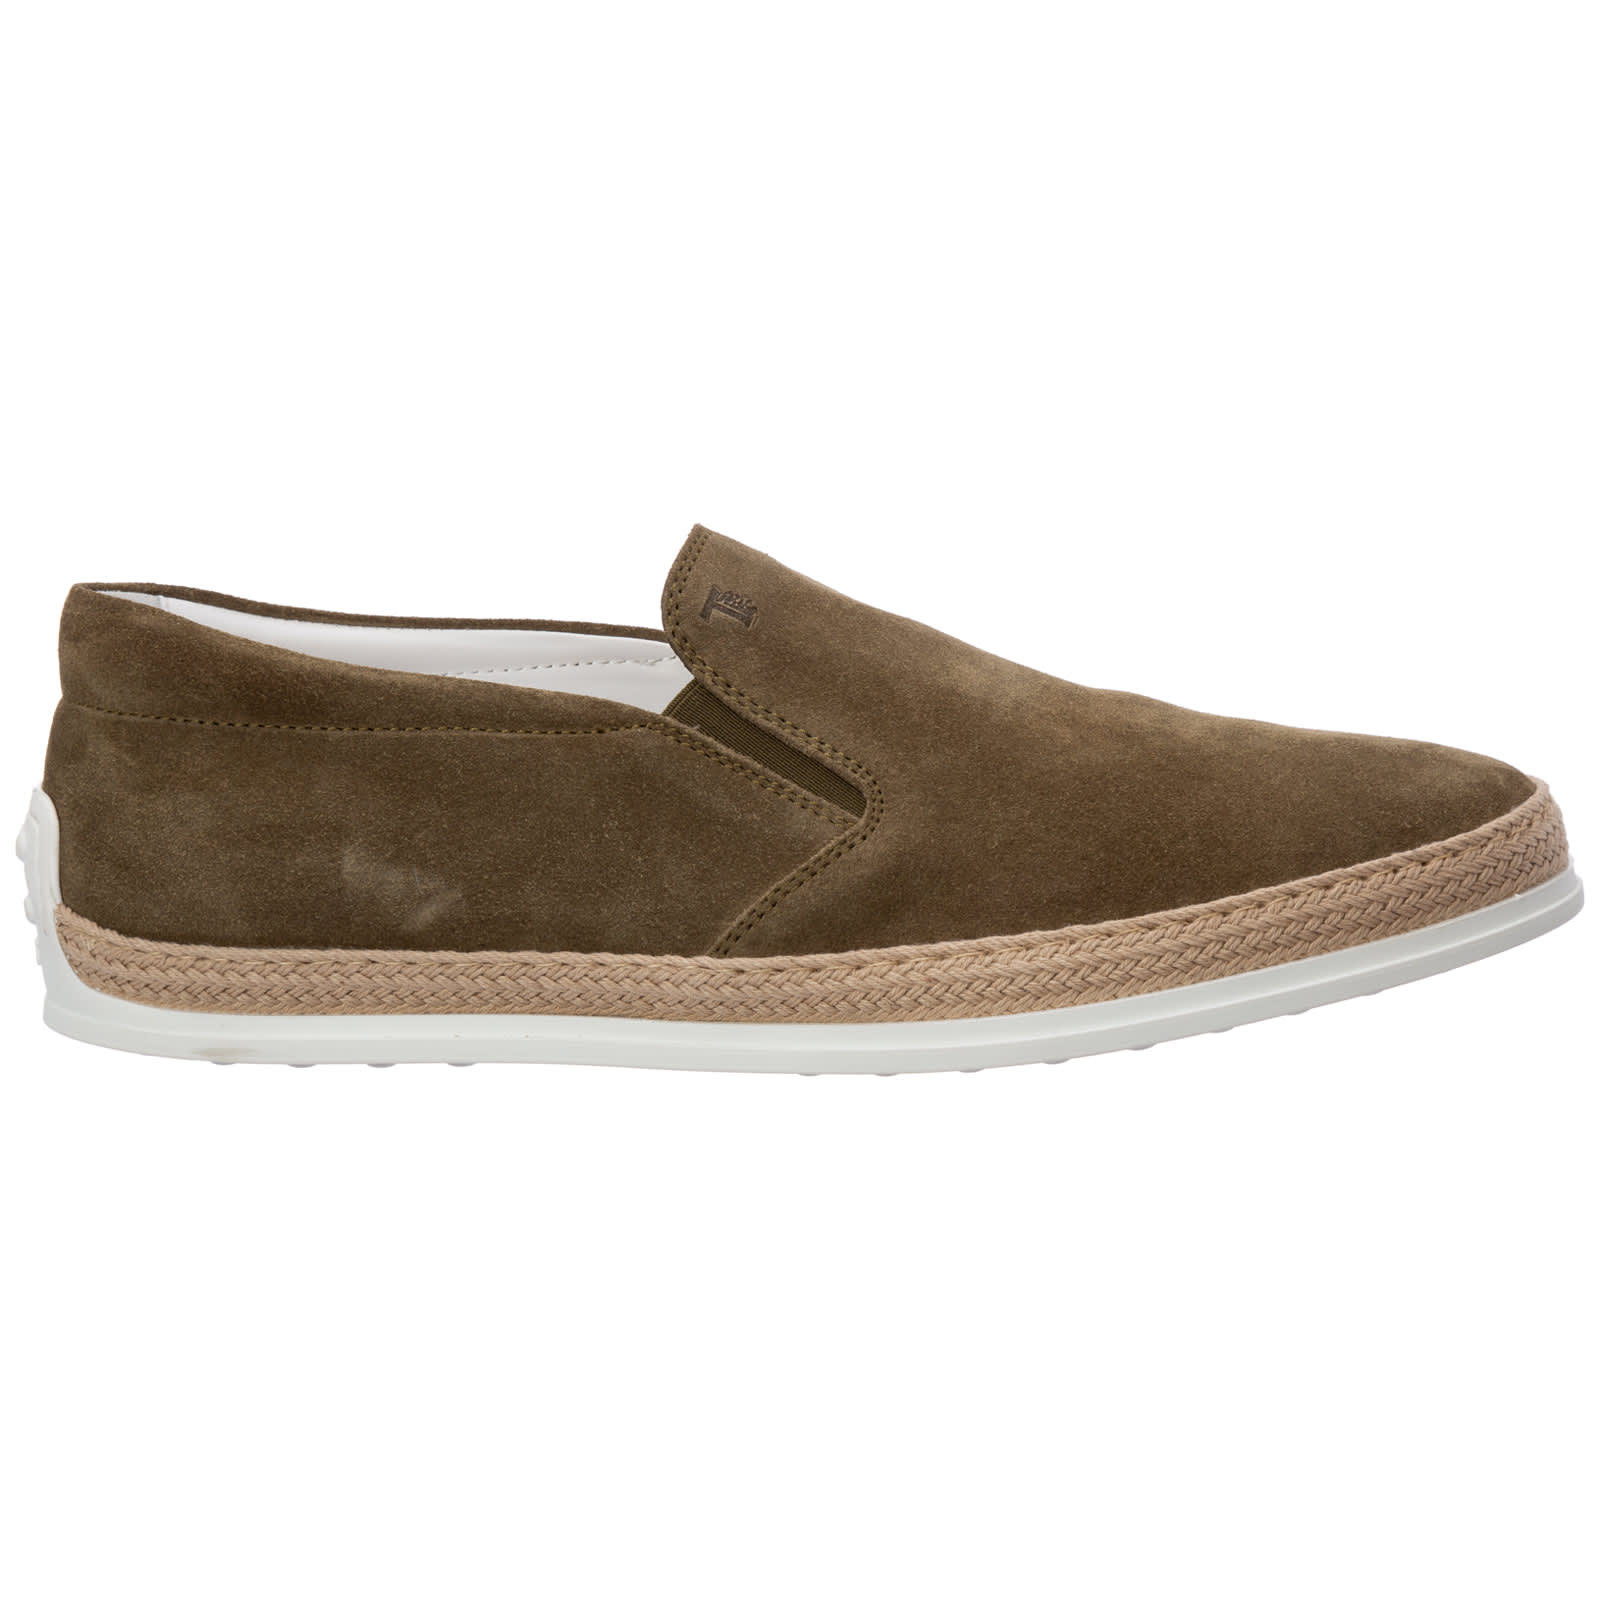 Tods Giggies Slip-on Shoes